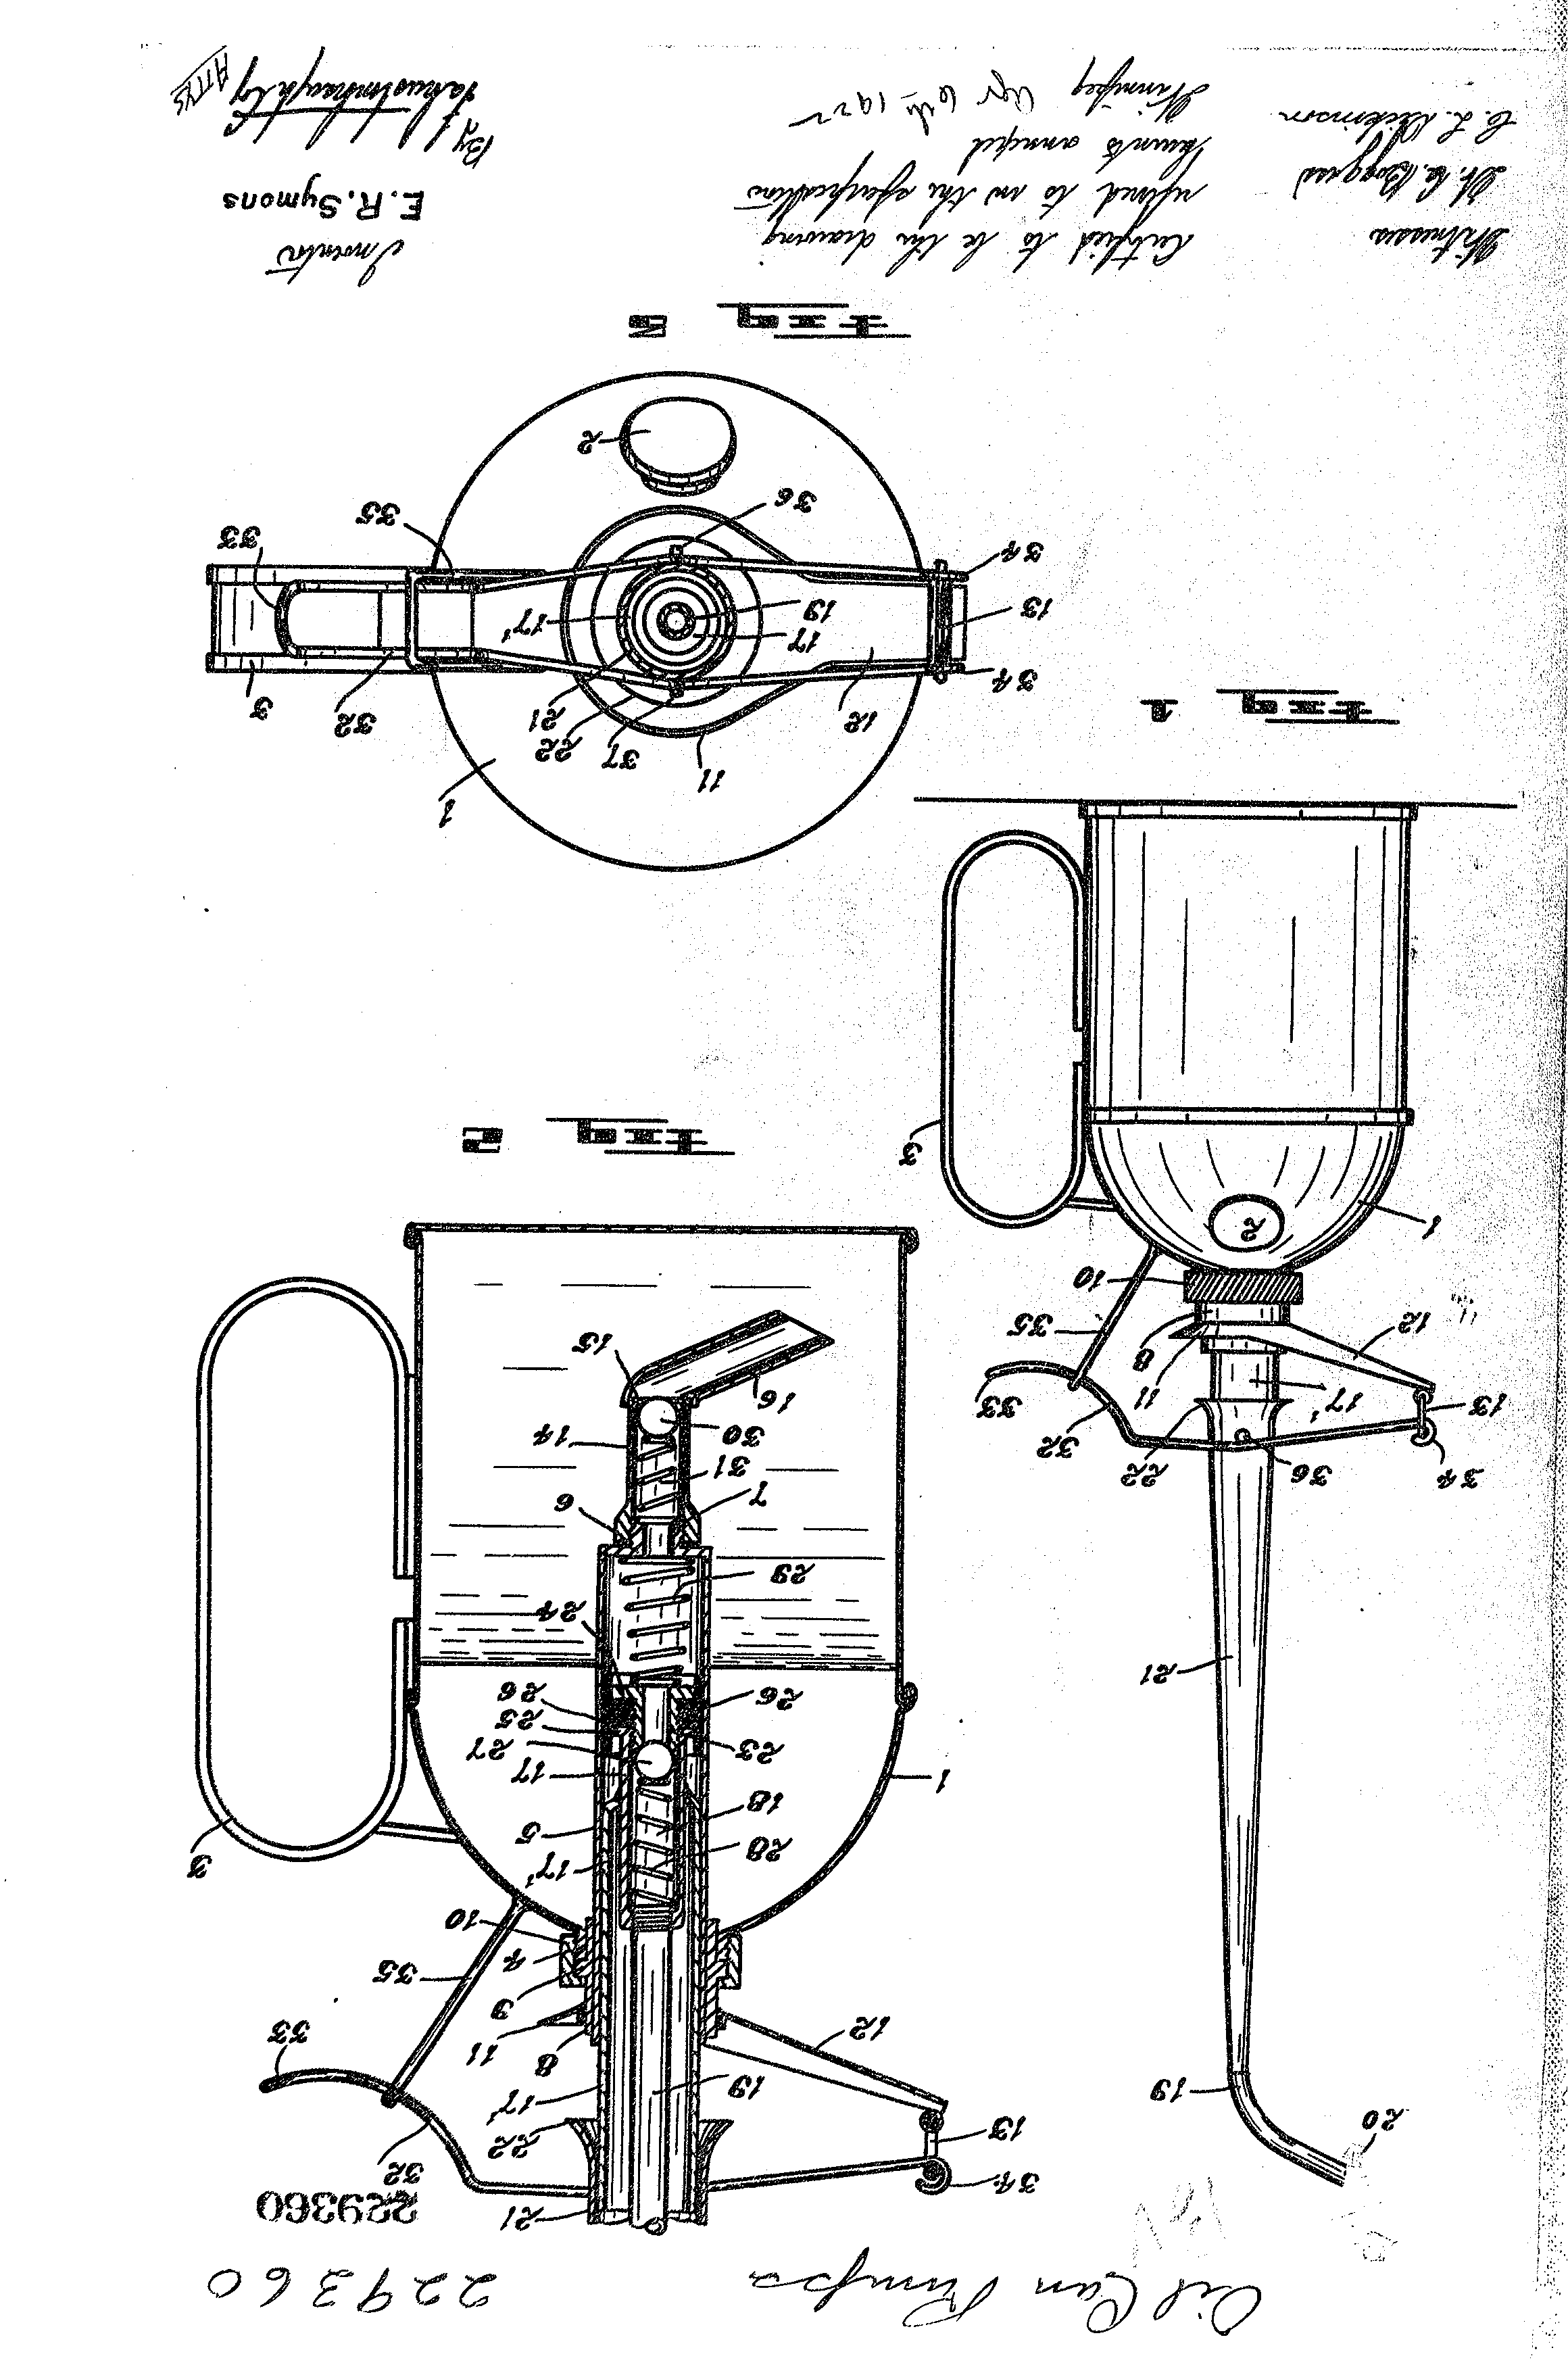 Canadian Patent Document 229360. Drawings 19941213. Image 1 of 1